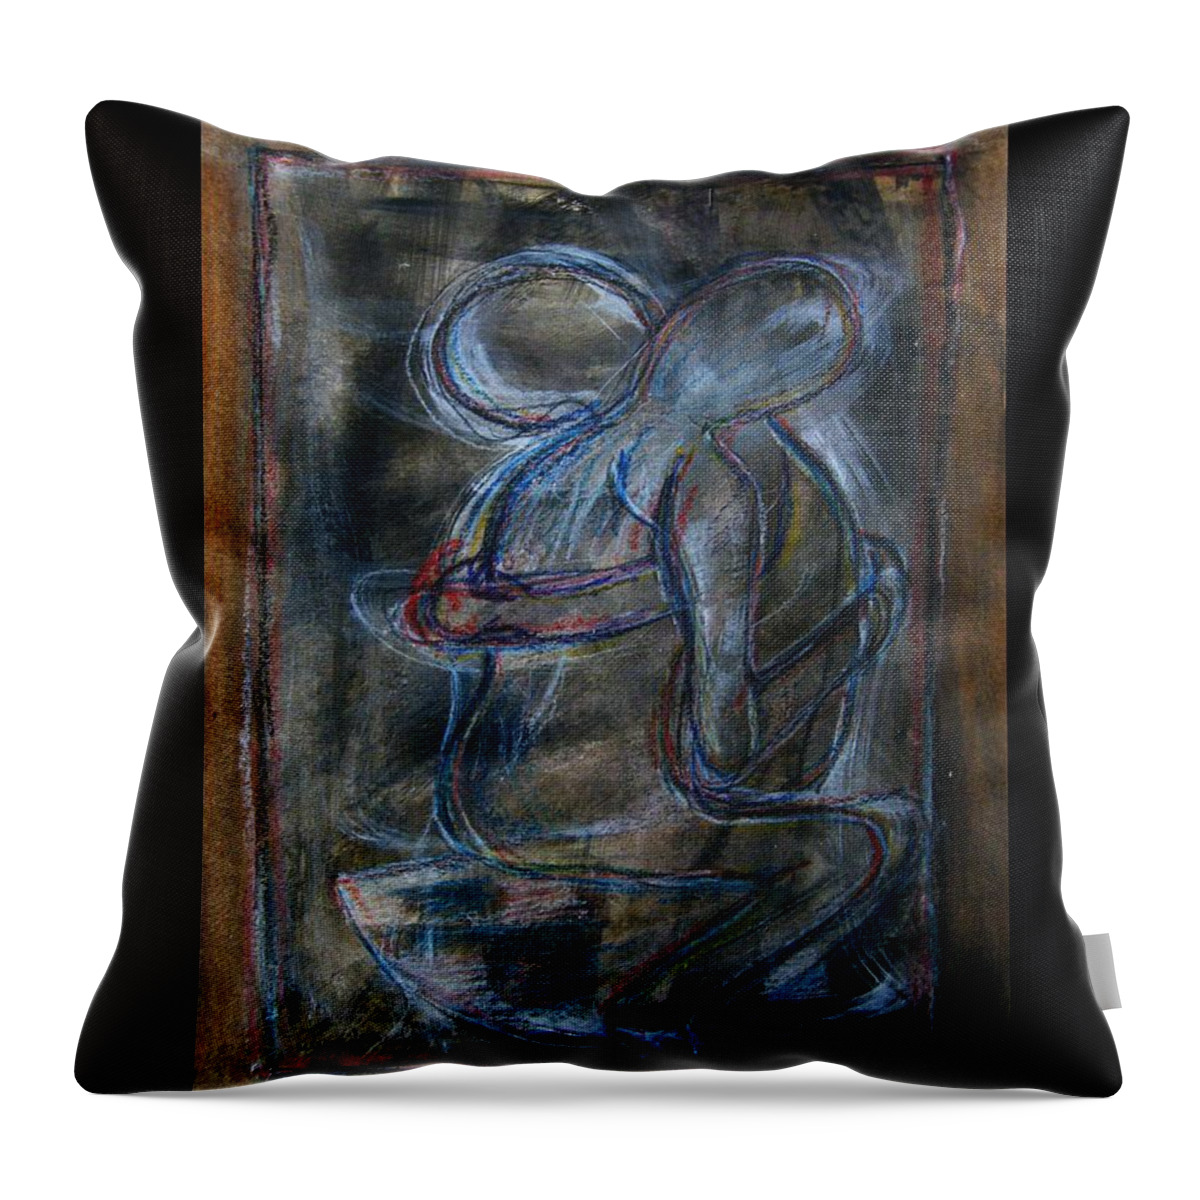 Tender Throw Pillow featuring the painting Tender Moment by Mimulux Patricia No